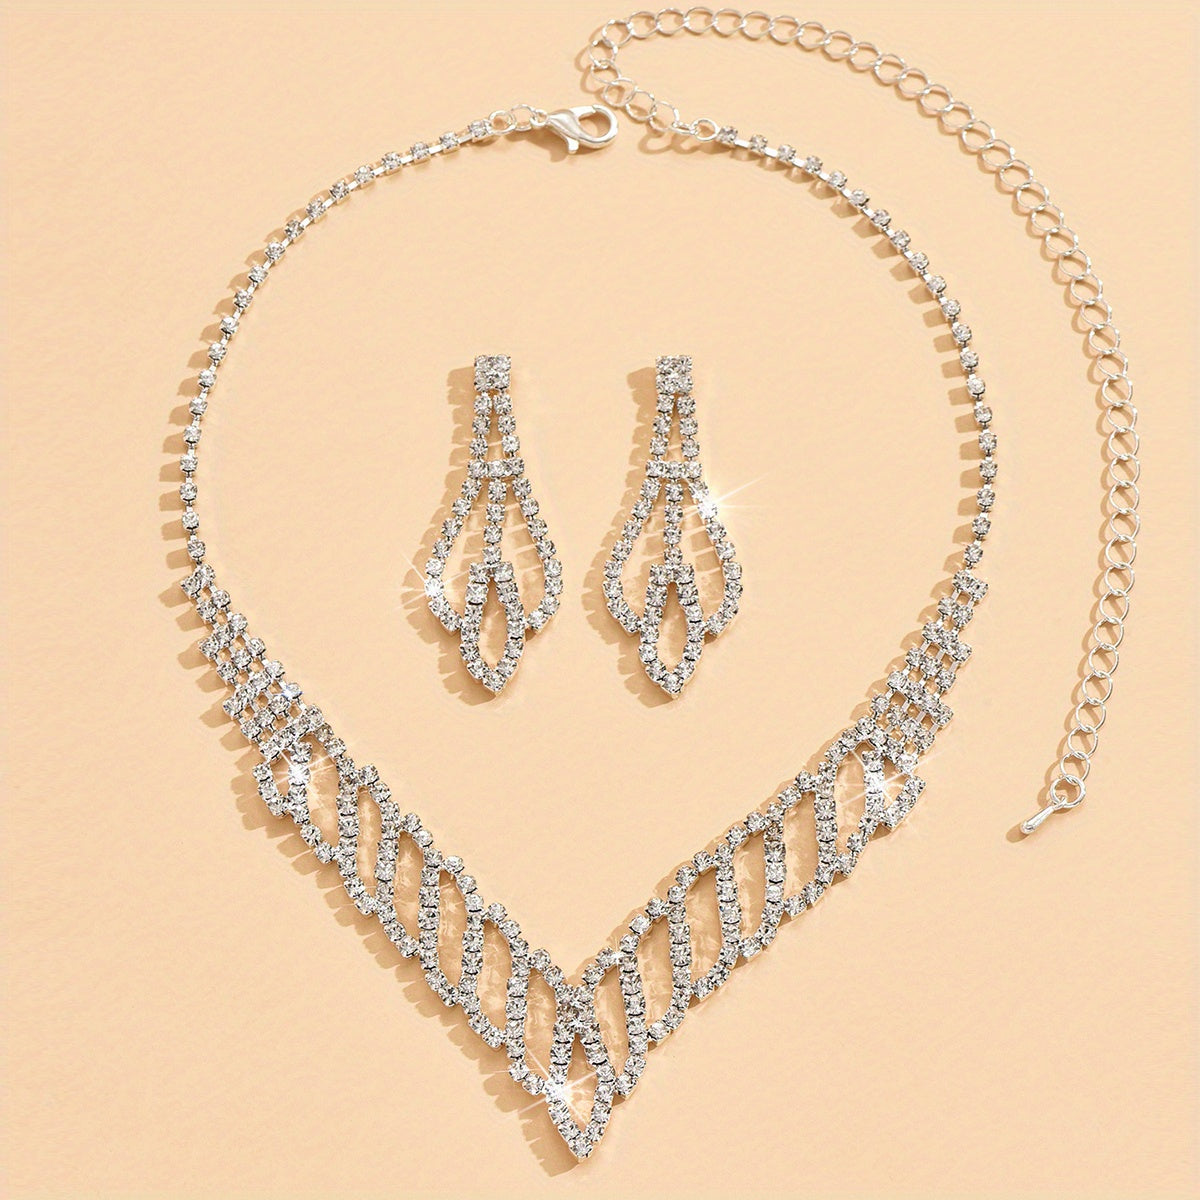 3pcs Earrings Plus Necklace Elegant Jewelry Set Silver Plated Inlaid Rhinestone Match Daily Outfits Dainty Party Accessories